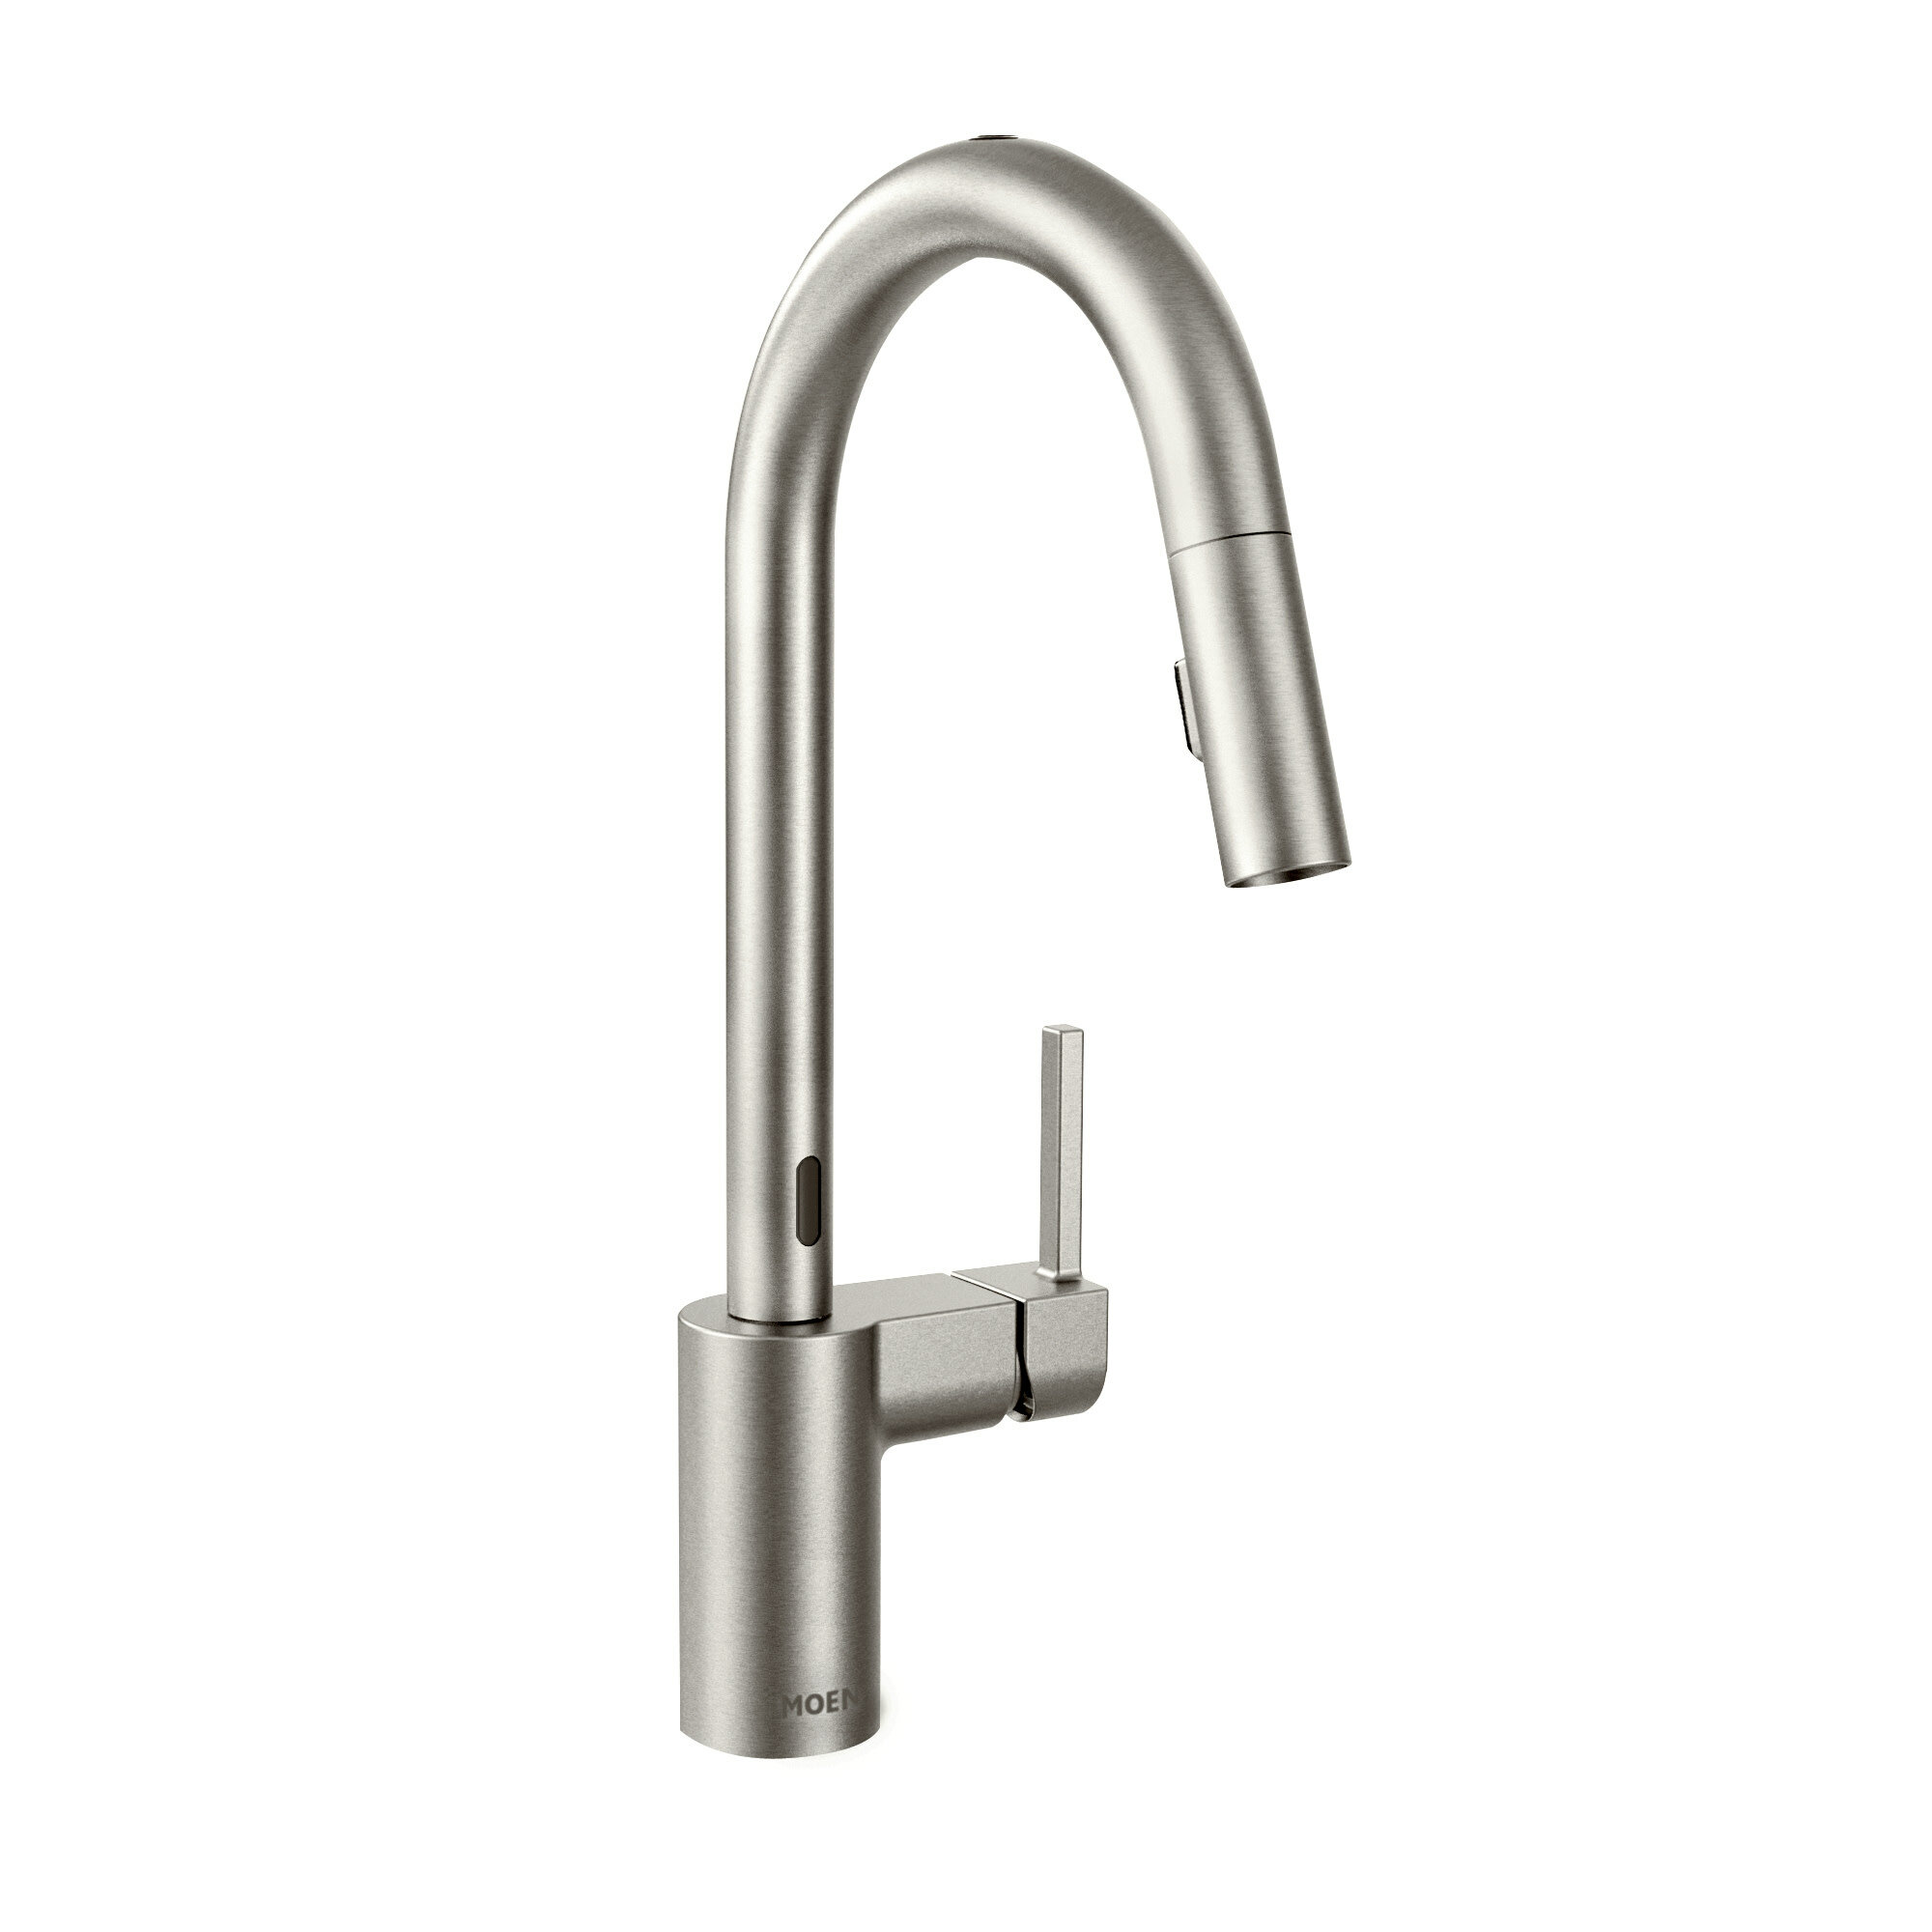 Moen Align Pull Down Single Handle Kitchen Faucet With Motionsense